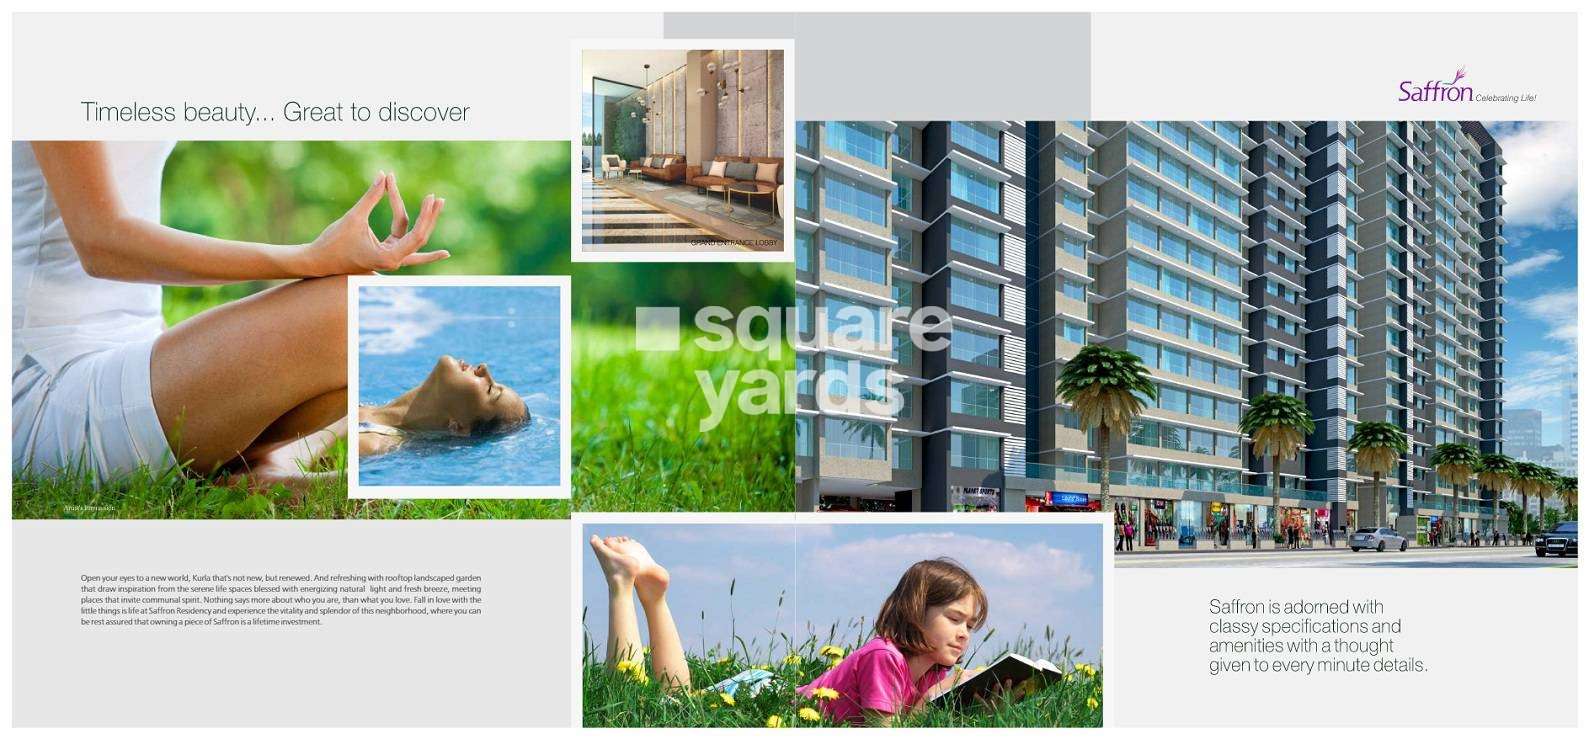 ayodhya saffron project amenities features1